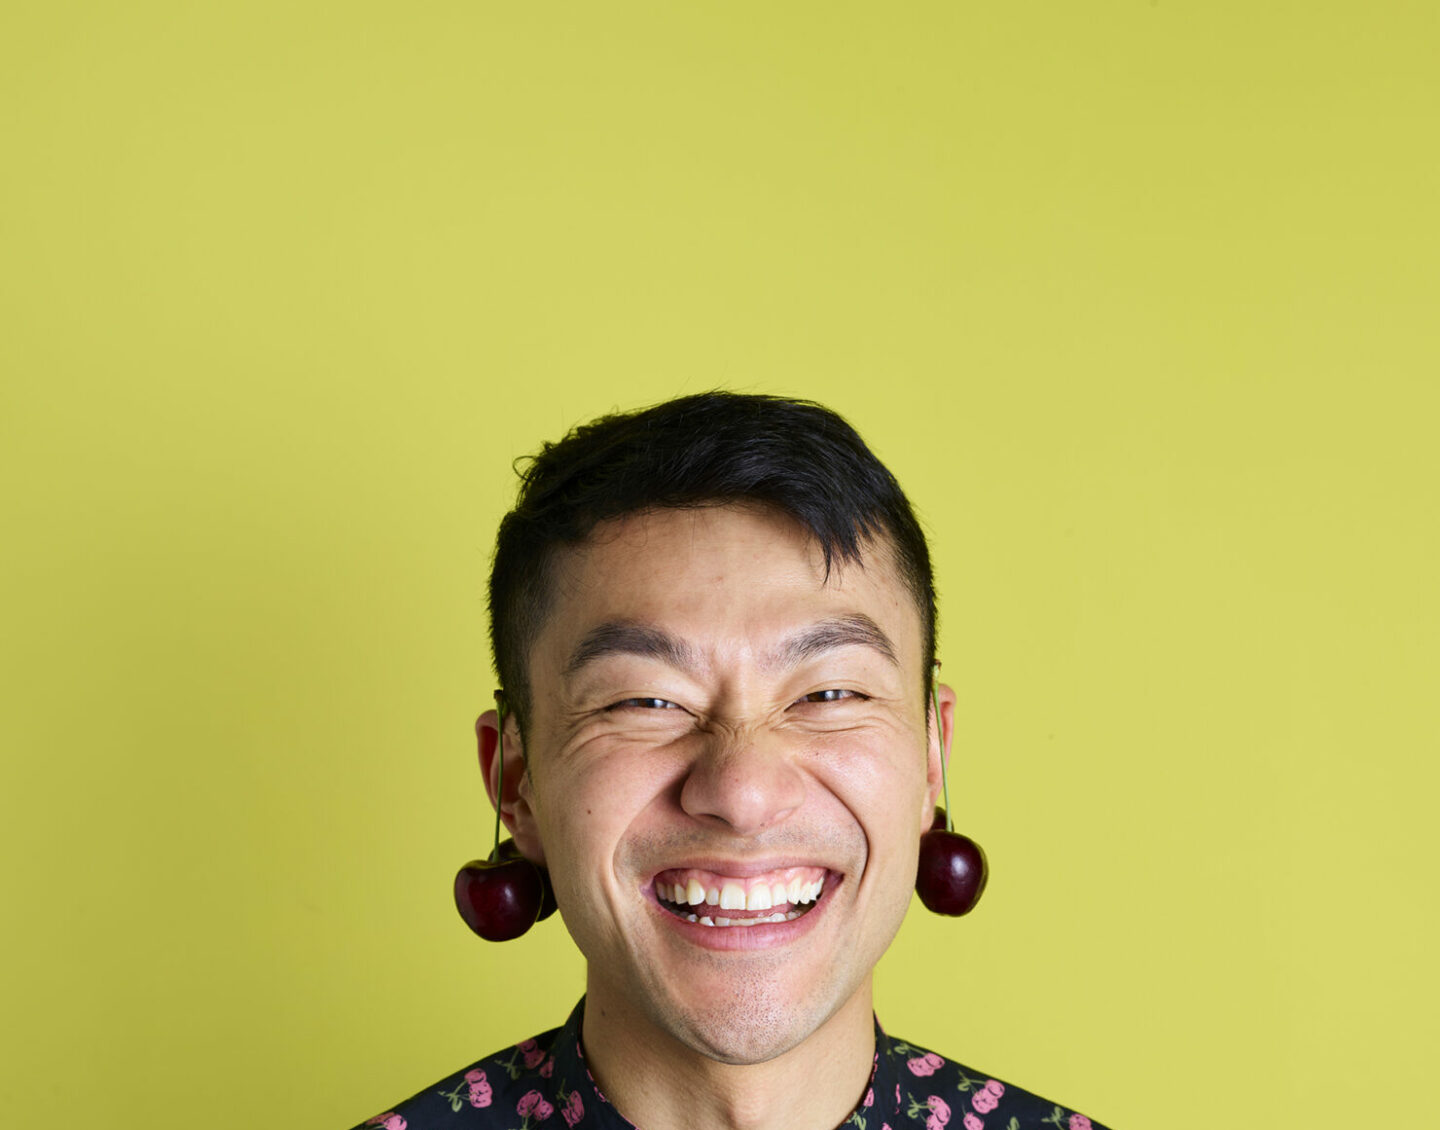 A black-haired man with cherries hanging over each ear grins at the camera in front of a yellow background